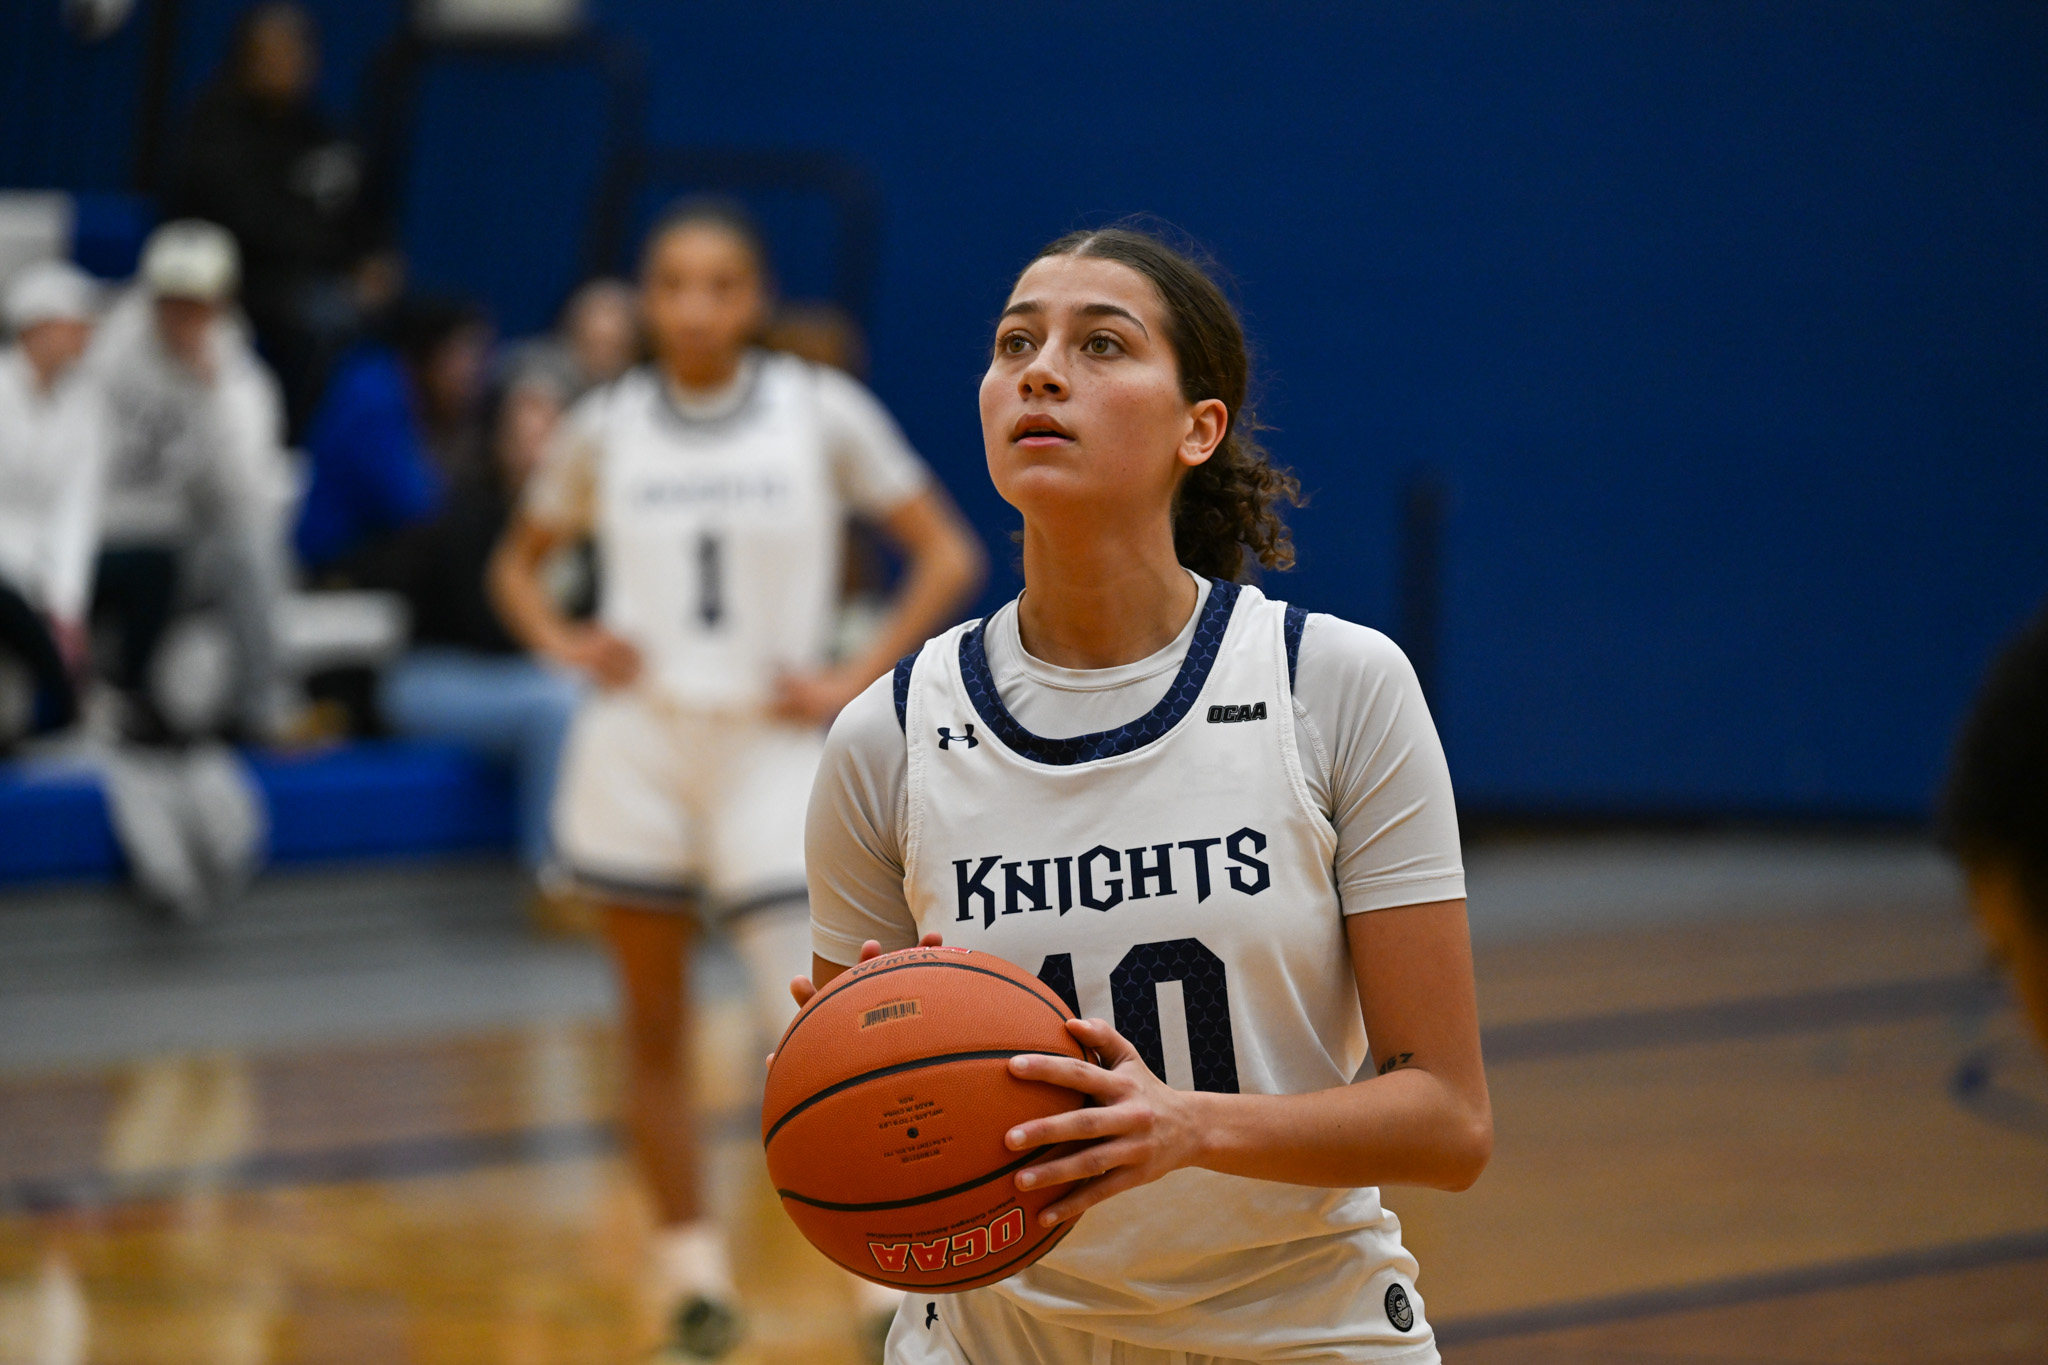 Knights Women’s Basketball come out on top of a tight matchup against the Mountaineers